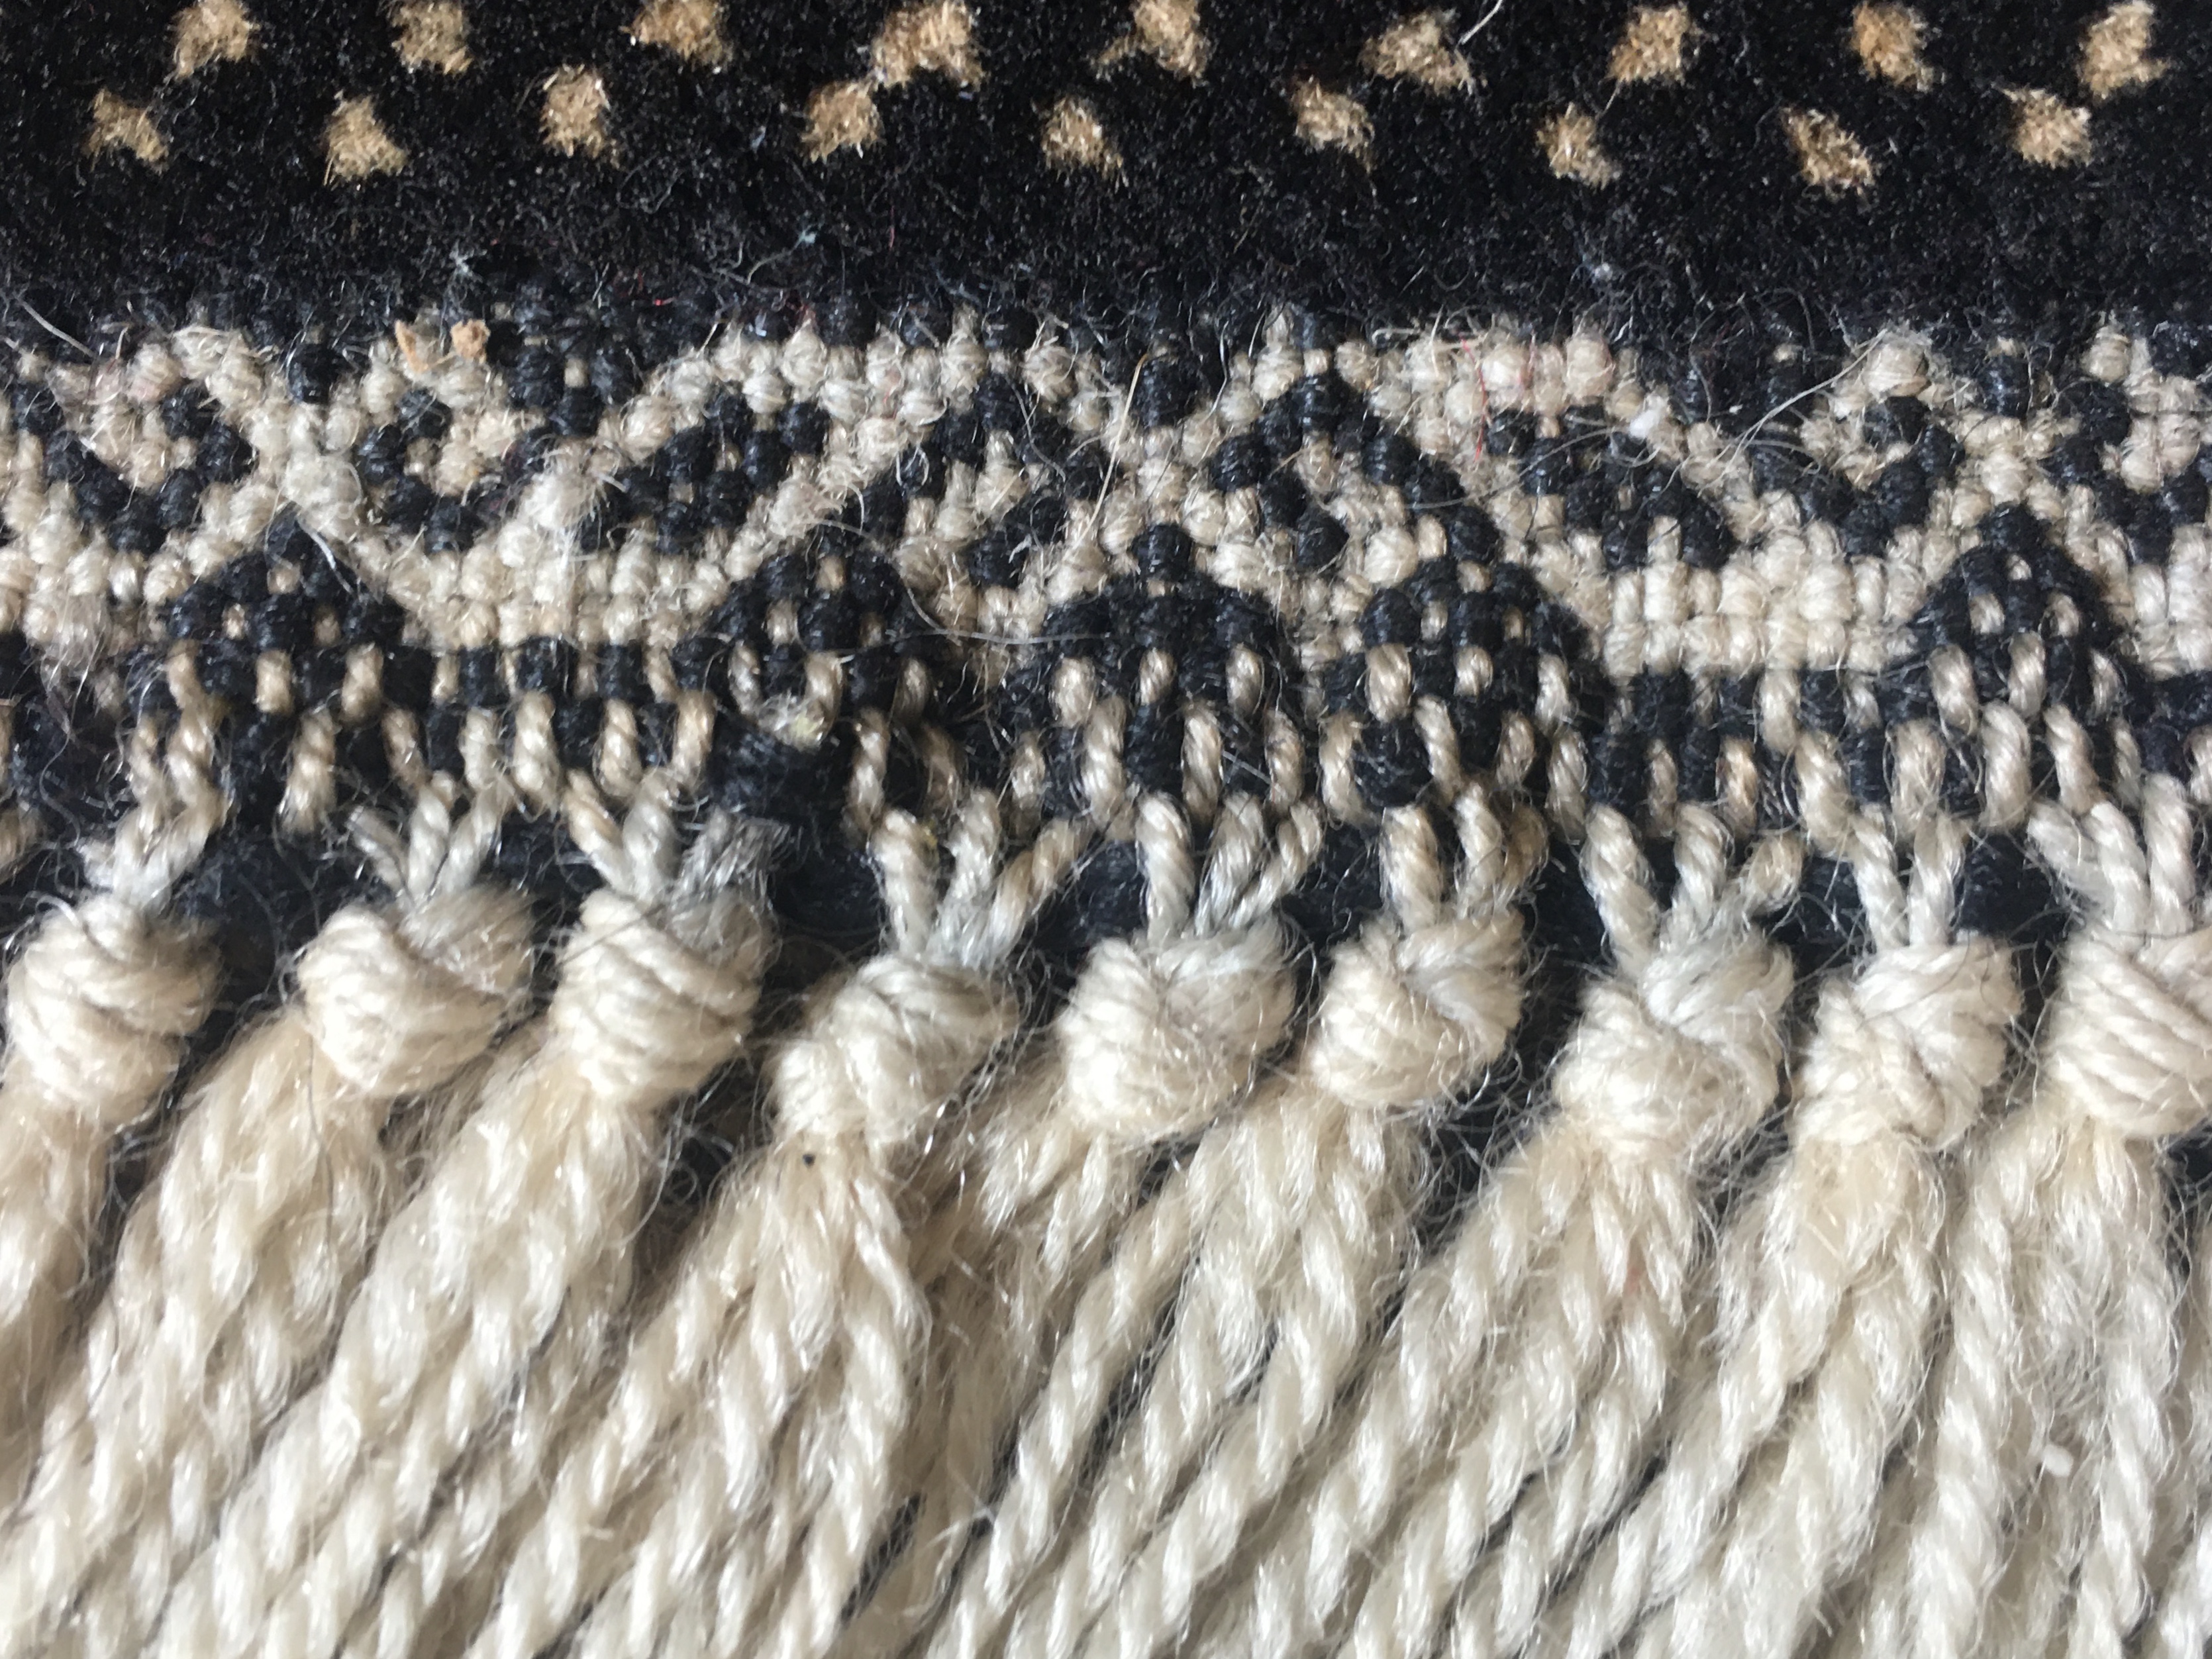 Detailing of patterns in the rug's woven edging